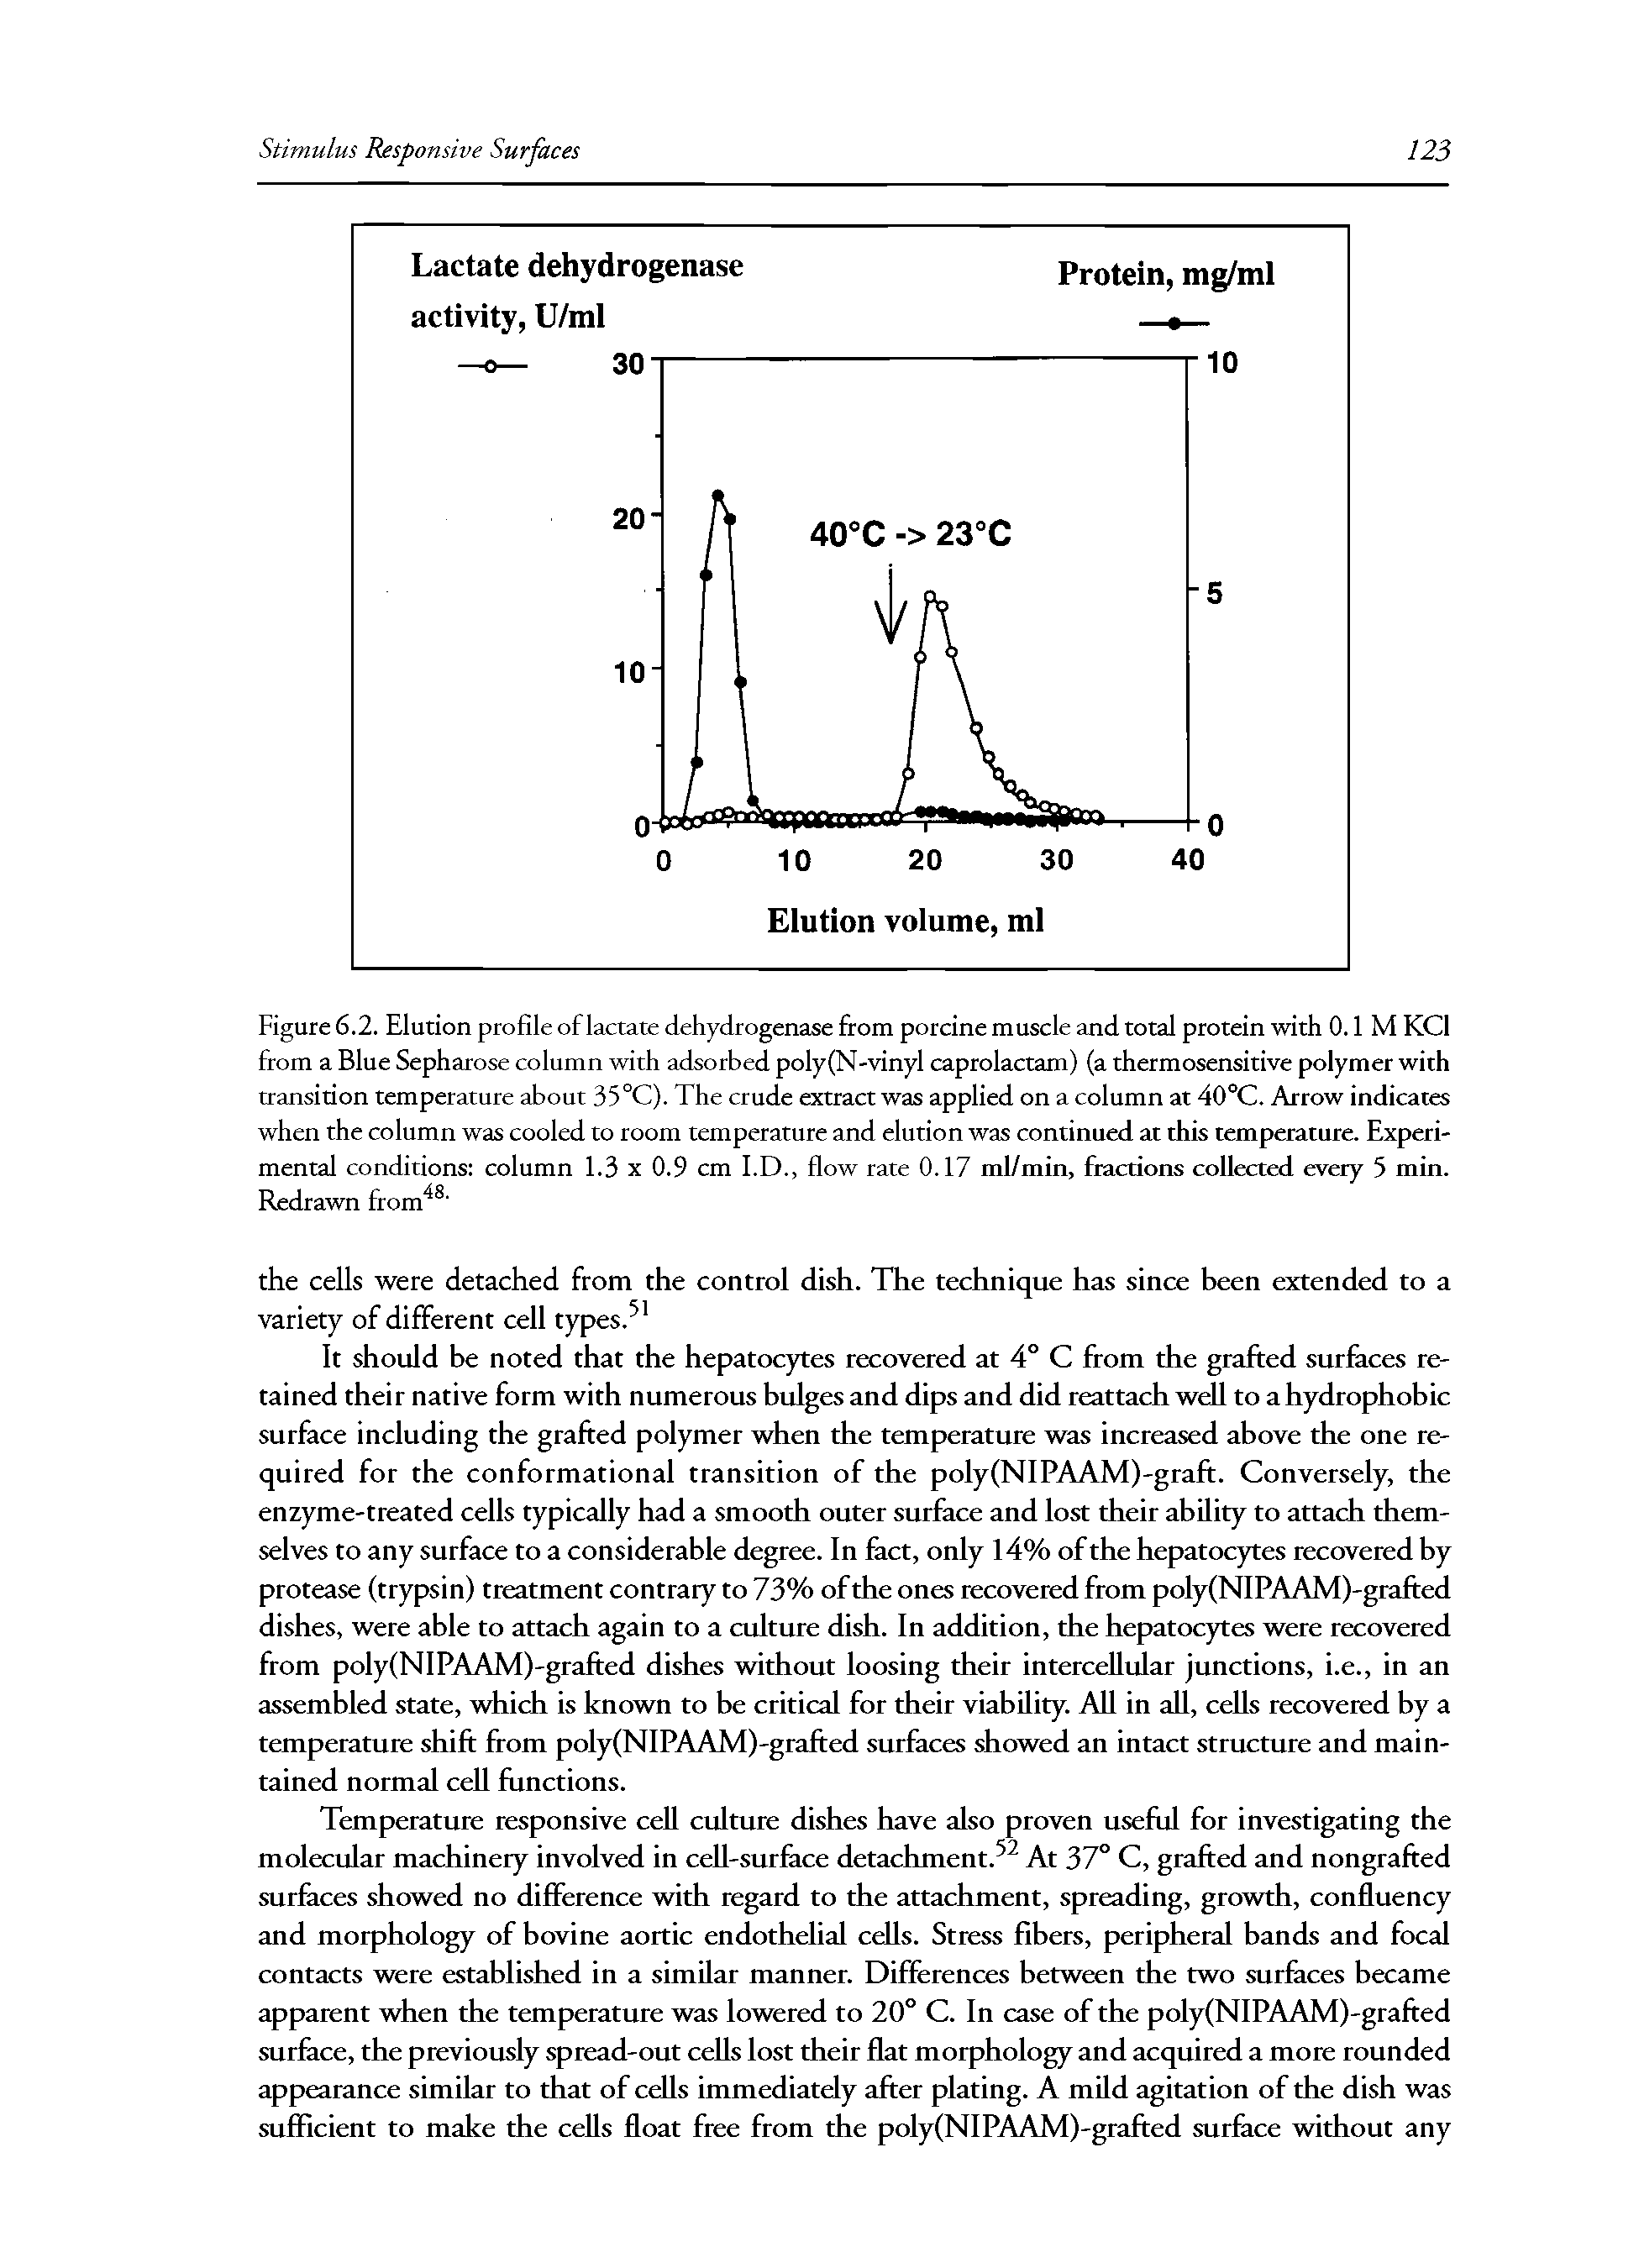 Figure 6.2. Elution profile of lactate dehydrogenase from porcine muscle and total protein with 0.1 M KCl from a Blue Sepharose column with adsorbed poly(N vinyl caprolactam) (a thermosensitive polymer with transition temperature about 35°C). The crude extract was applied on a column at 40°C. Arrow indicates when the column was cooled to room temperature and elution was continued at this temperature. Experimental conditions column 1.3 x 0.9 cm I.D., flow rate 0.17 ml/min, fractions collected every 5 min. Redrawn from ...